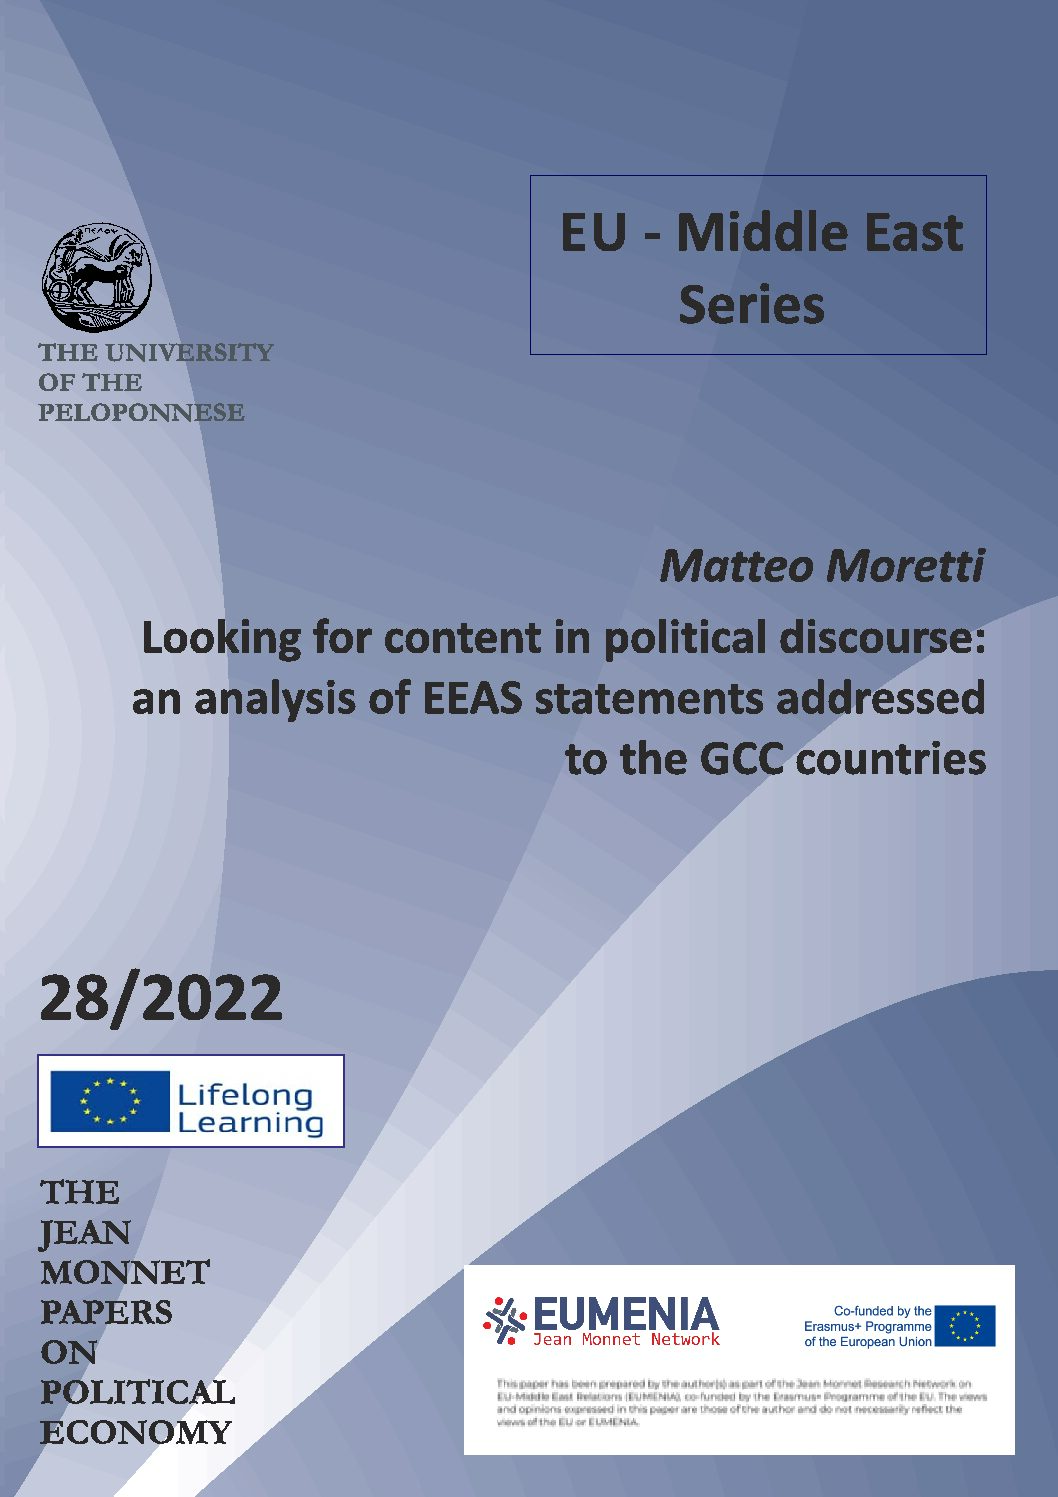 WORKING PAPER N°6 “LOOKING FOR CONTENT IN POLITICAL DISCOURSE: AN ANALYSIS OF EEAS STATEMENTS ADDRESSED TO THE GCC COUNTRIES